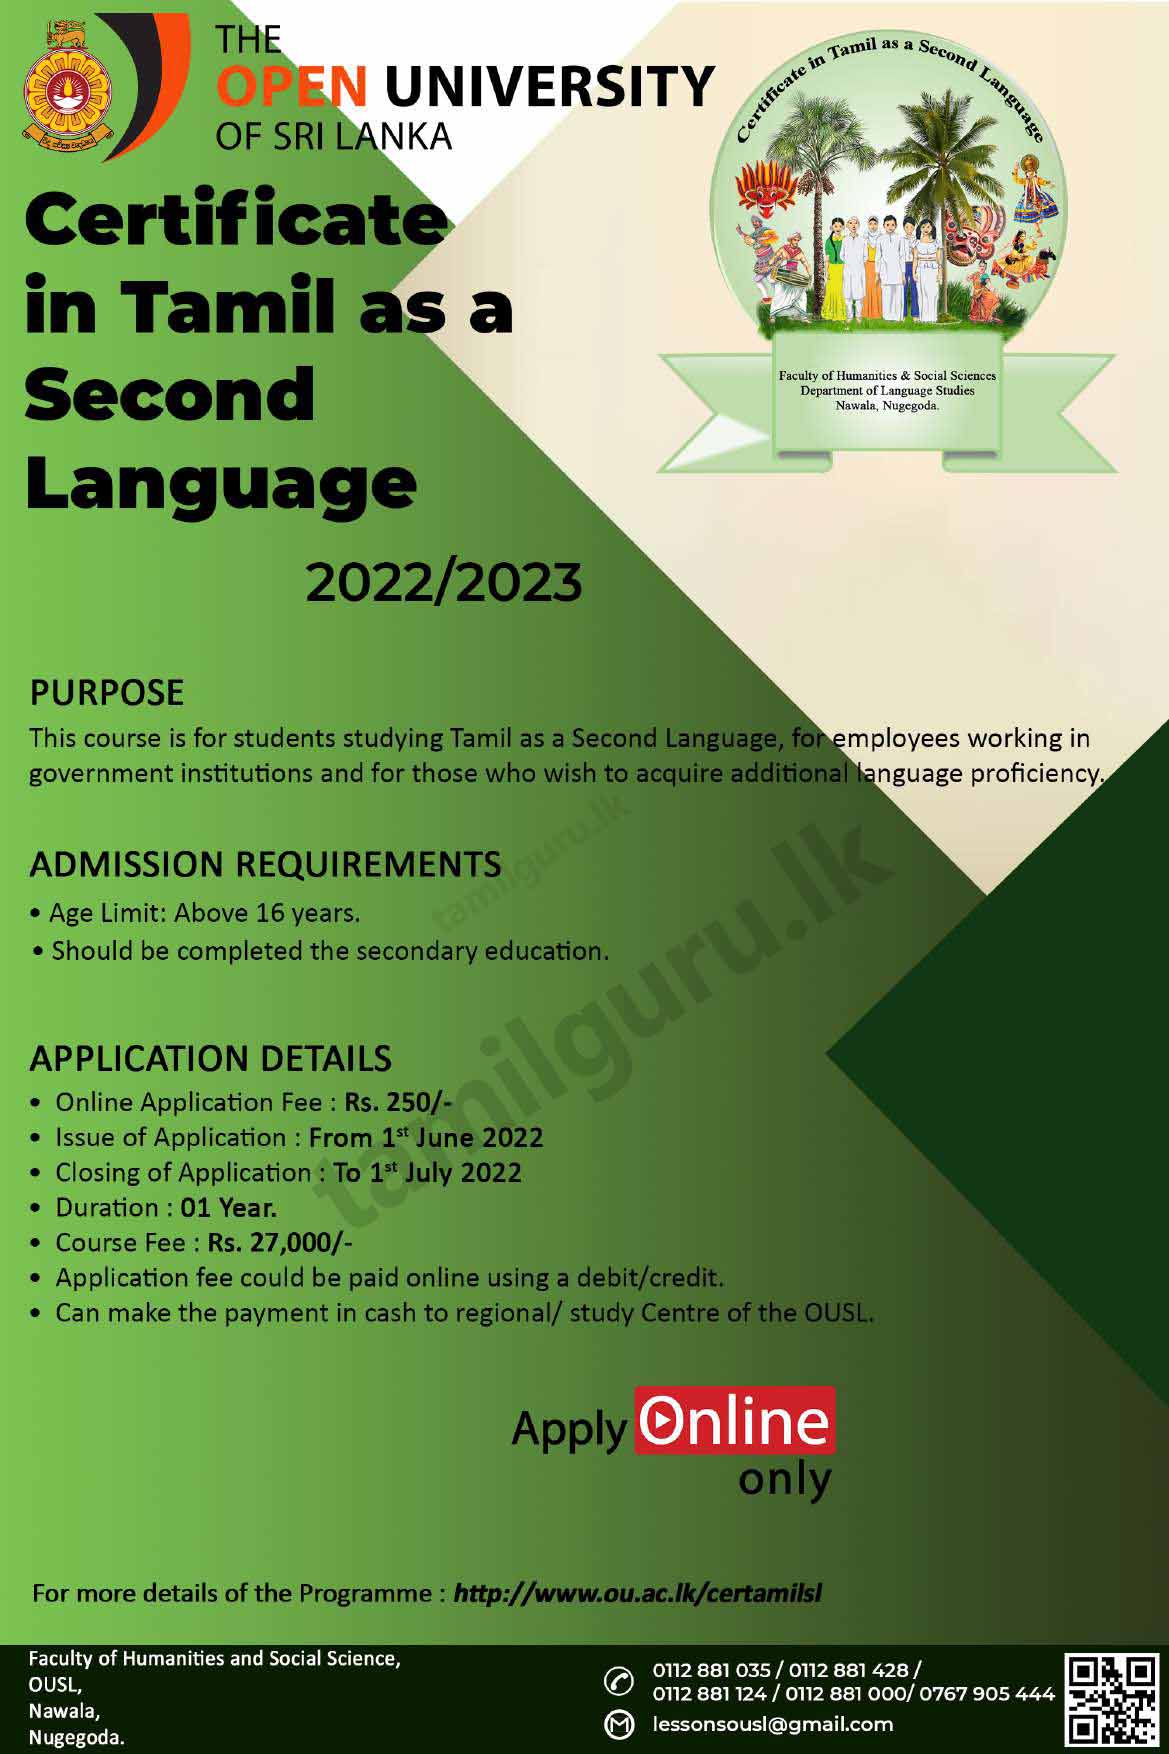 Certificate in Tamil as a Second Language Course 2022/2023 - The Open University of Sri Lanka (OUSL)